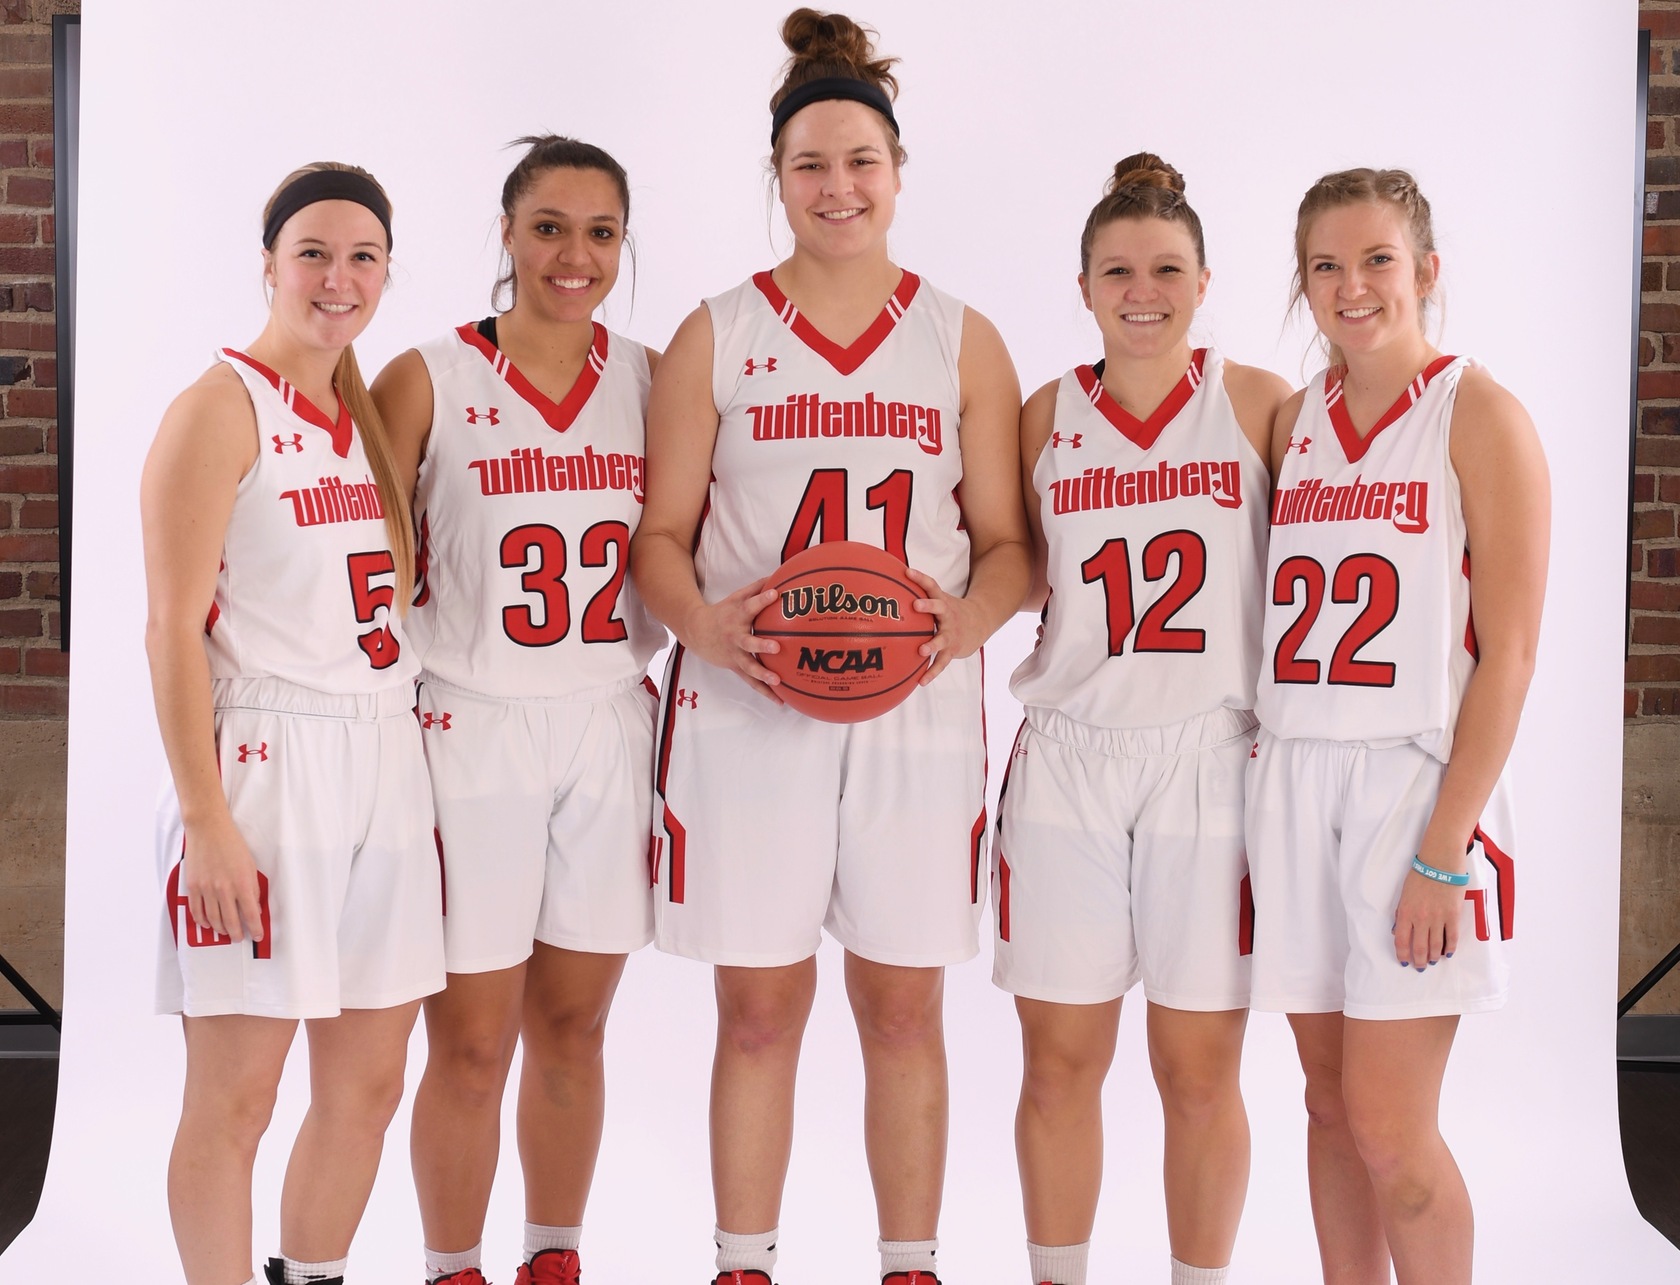 After falling in the semis of the 2019 NCAC Tournament against DePauw, the Wittenberg women's basketball senior class closed out their careers with an overall record of 51-54